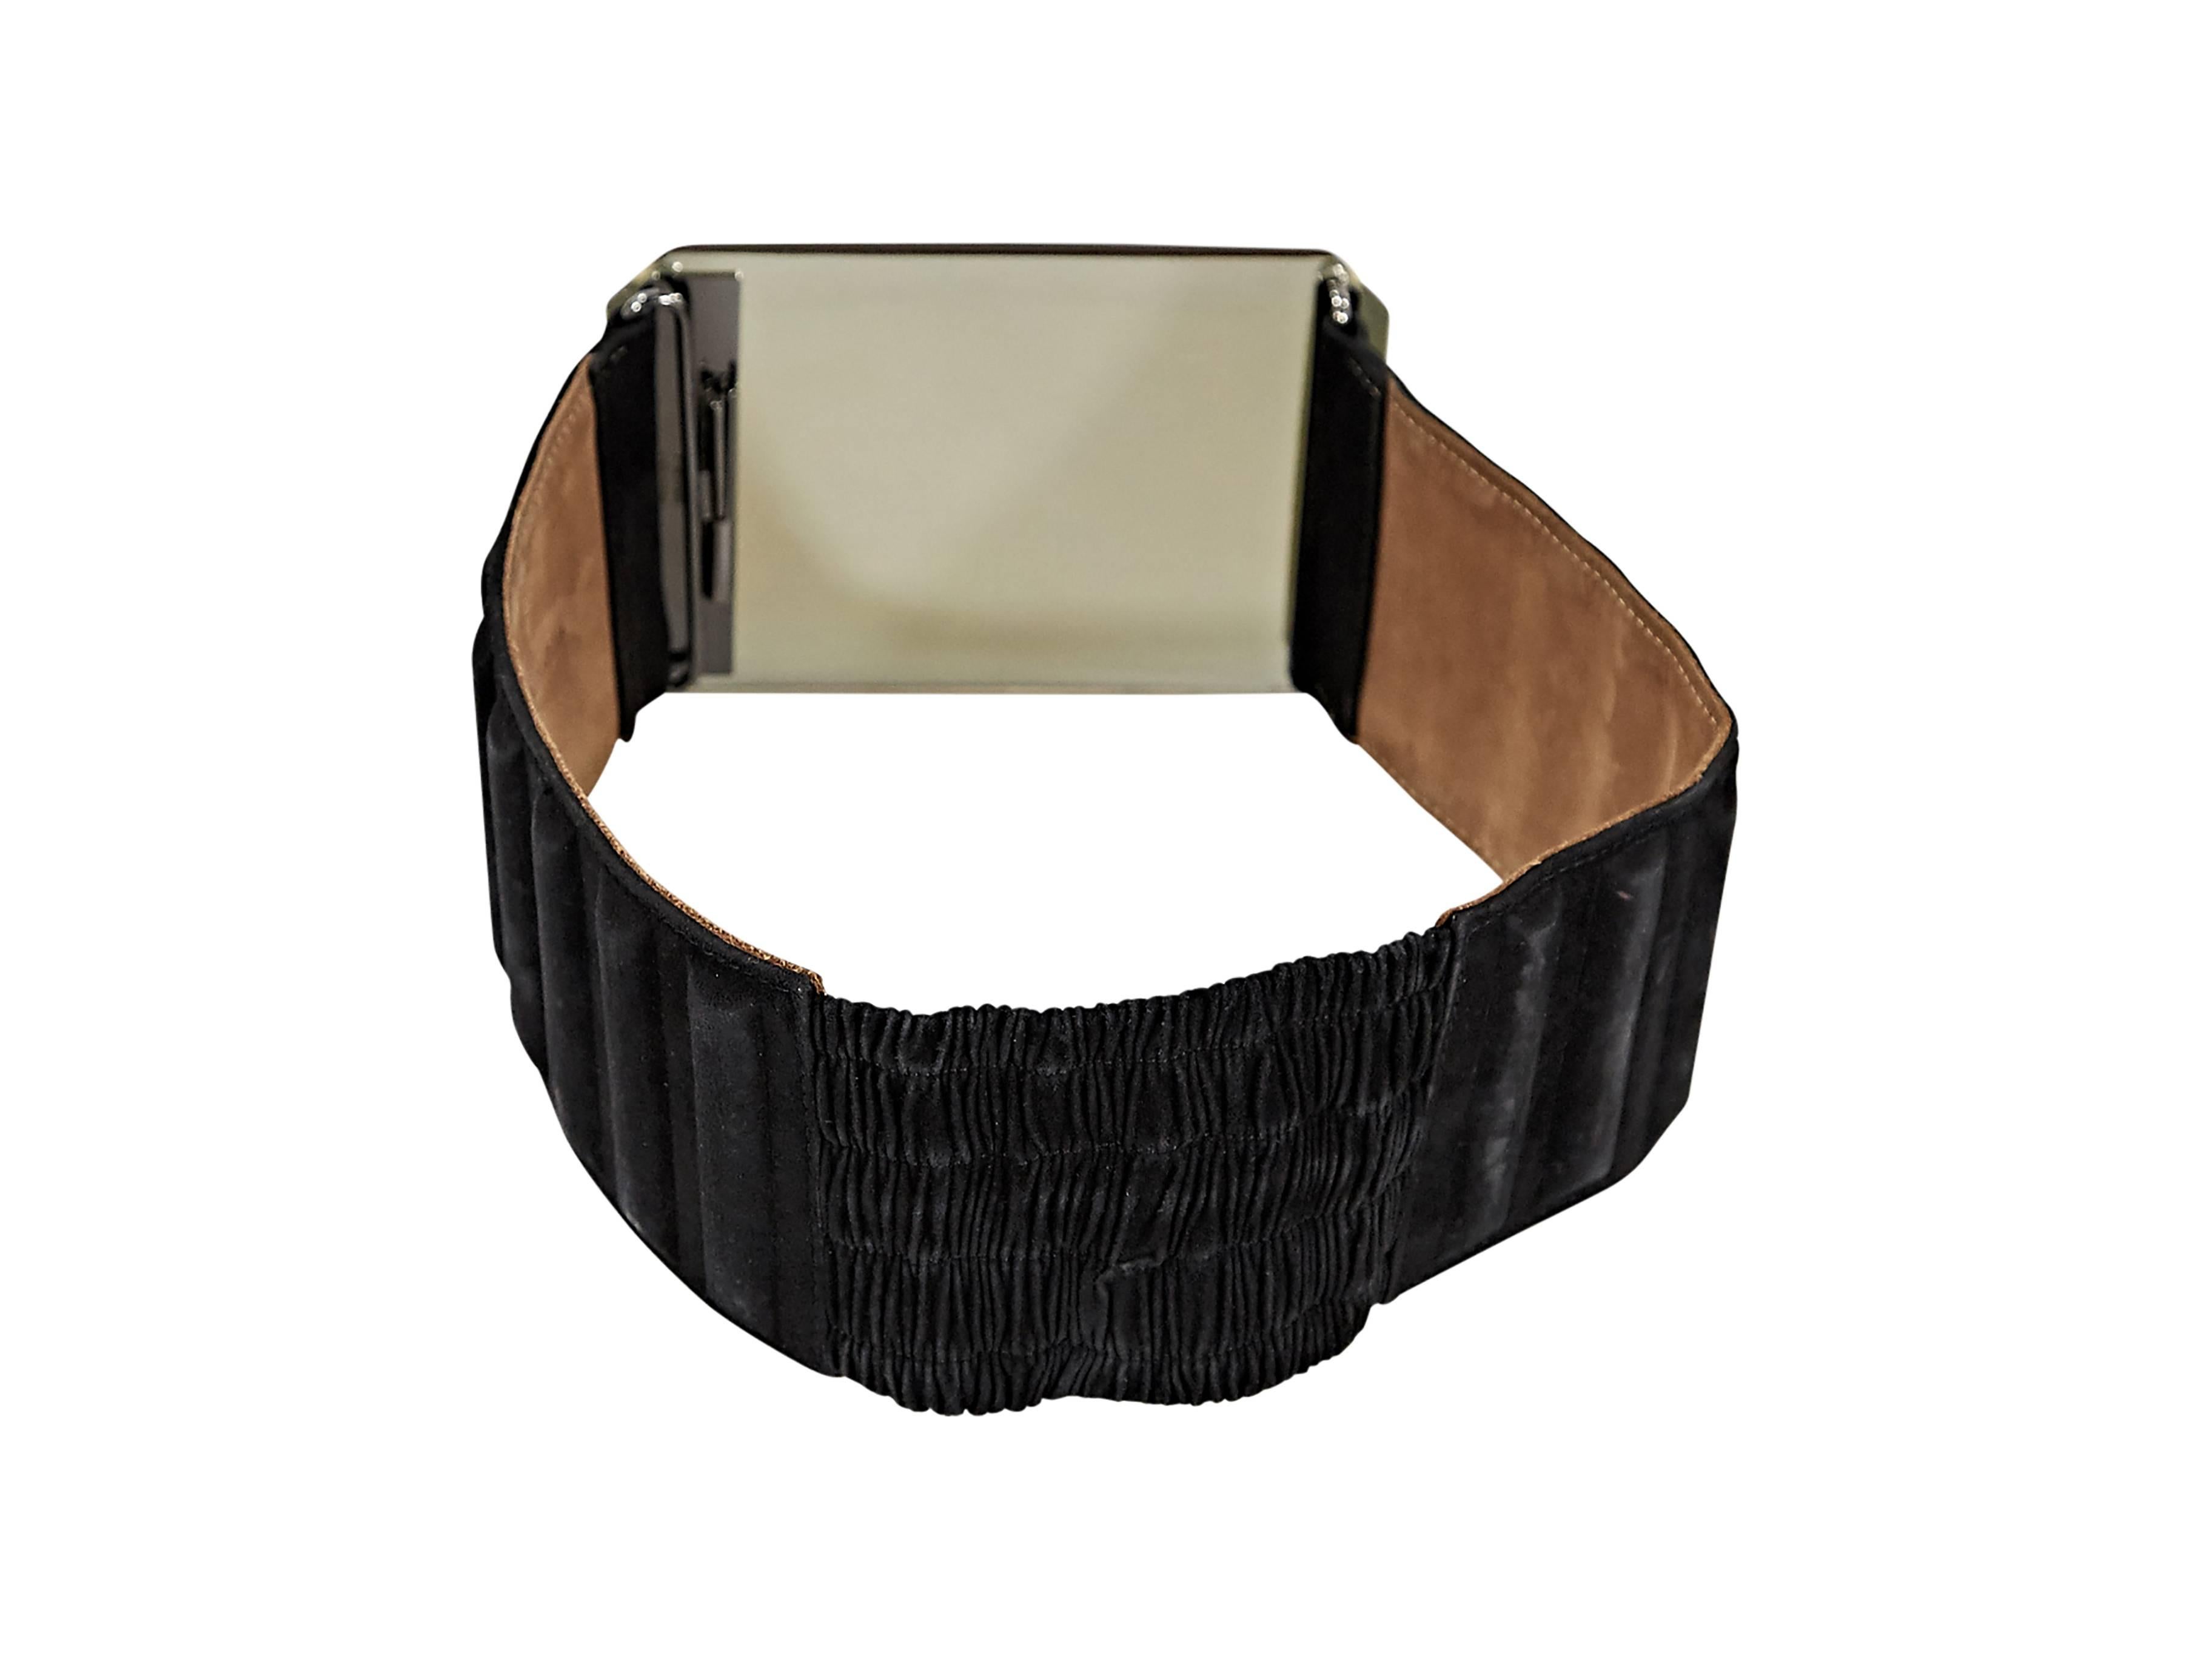 Black suede belt by Fendi.  Raised accents.  Faceted yellow stone buckle with hidden closure.  Inset elastic panel for a stretch fit. 